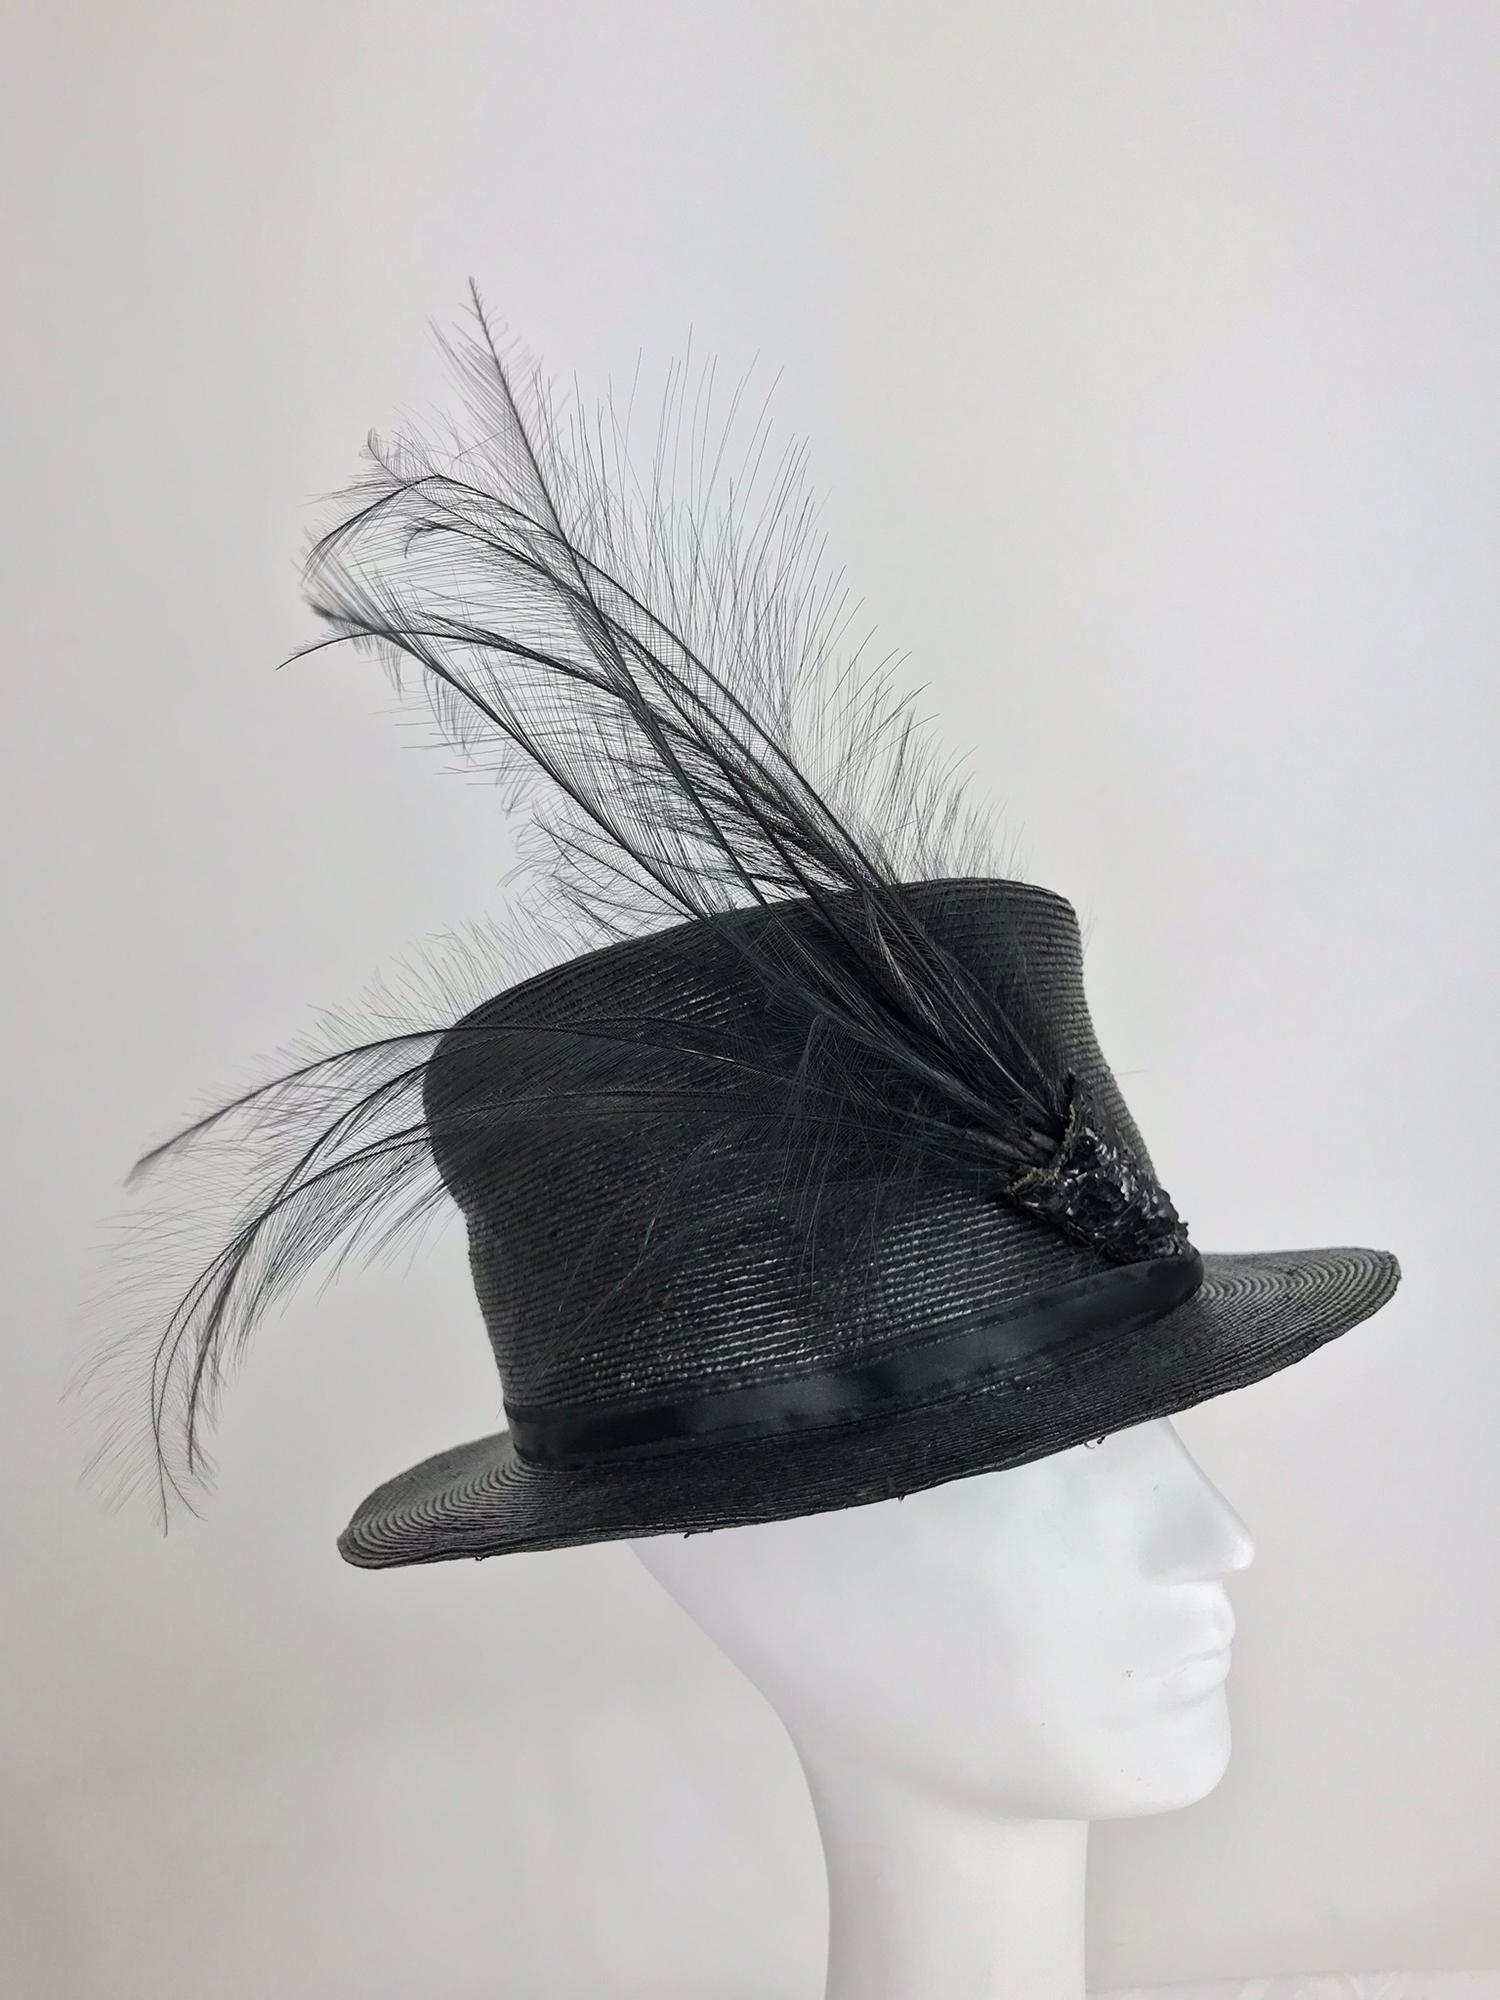 Edwardian Glazed black straw hat with Bird of Paradise feathers. Tall crown hat with a narrow brim is made from a fine black glazed straw. The hat has a narrow ribbon band (replaced) with the original black sequin decoration that holds the plume of